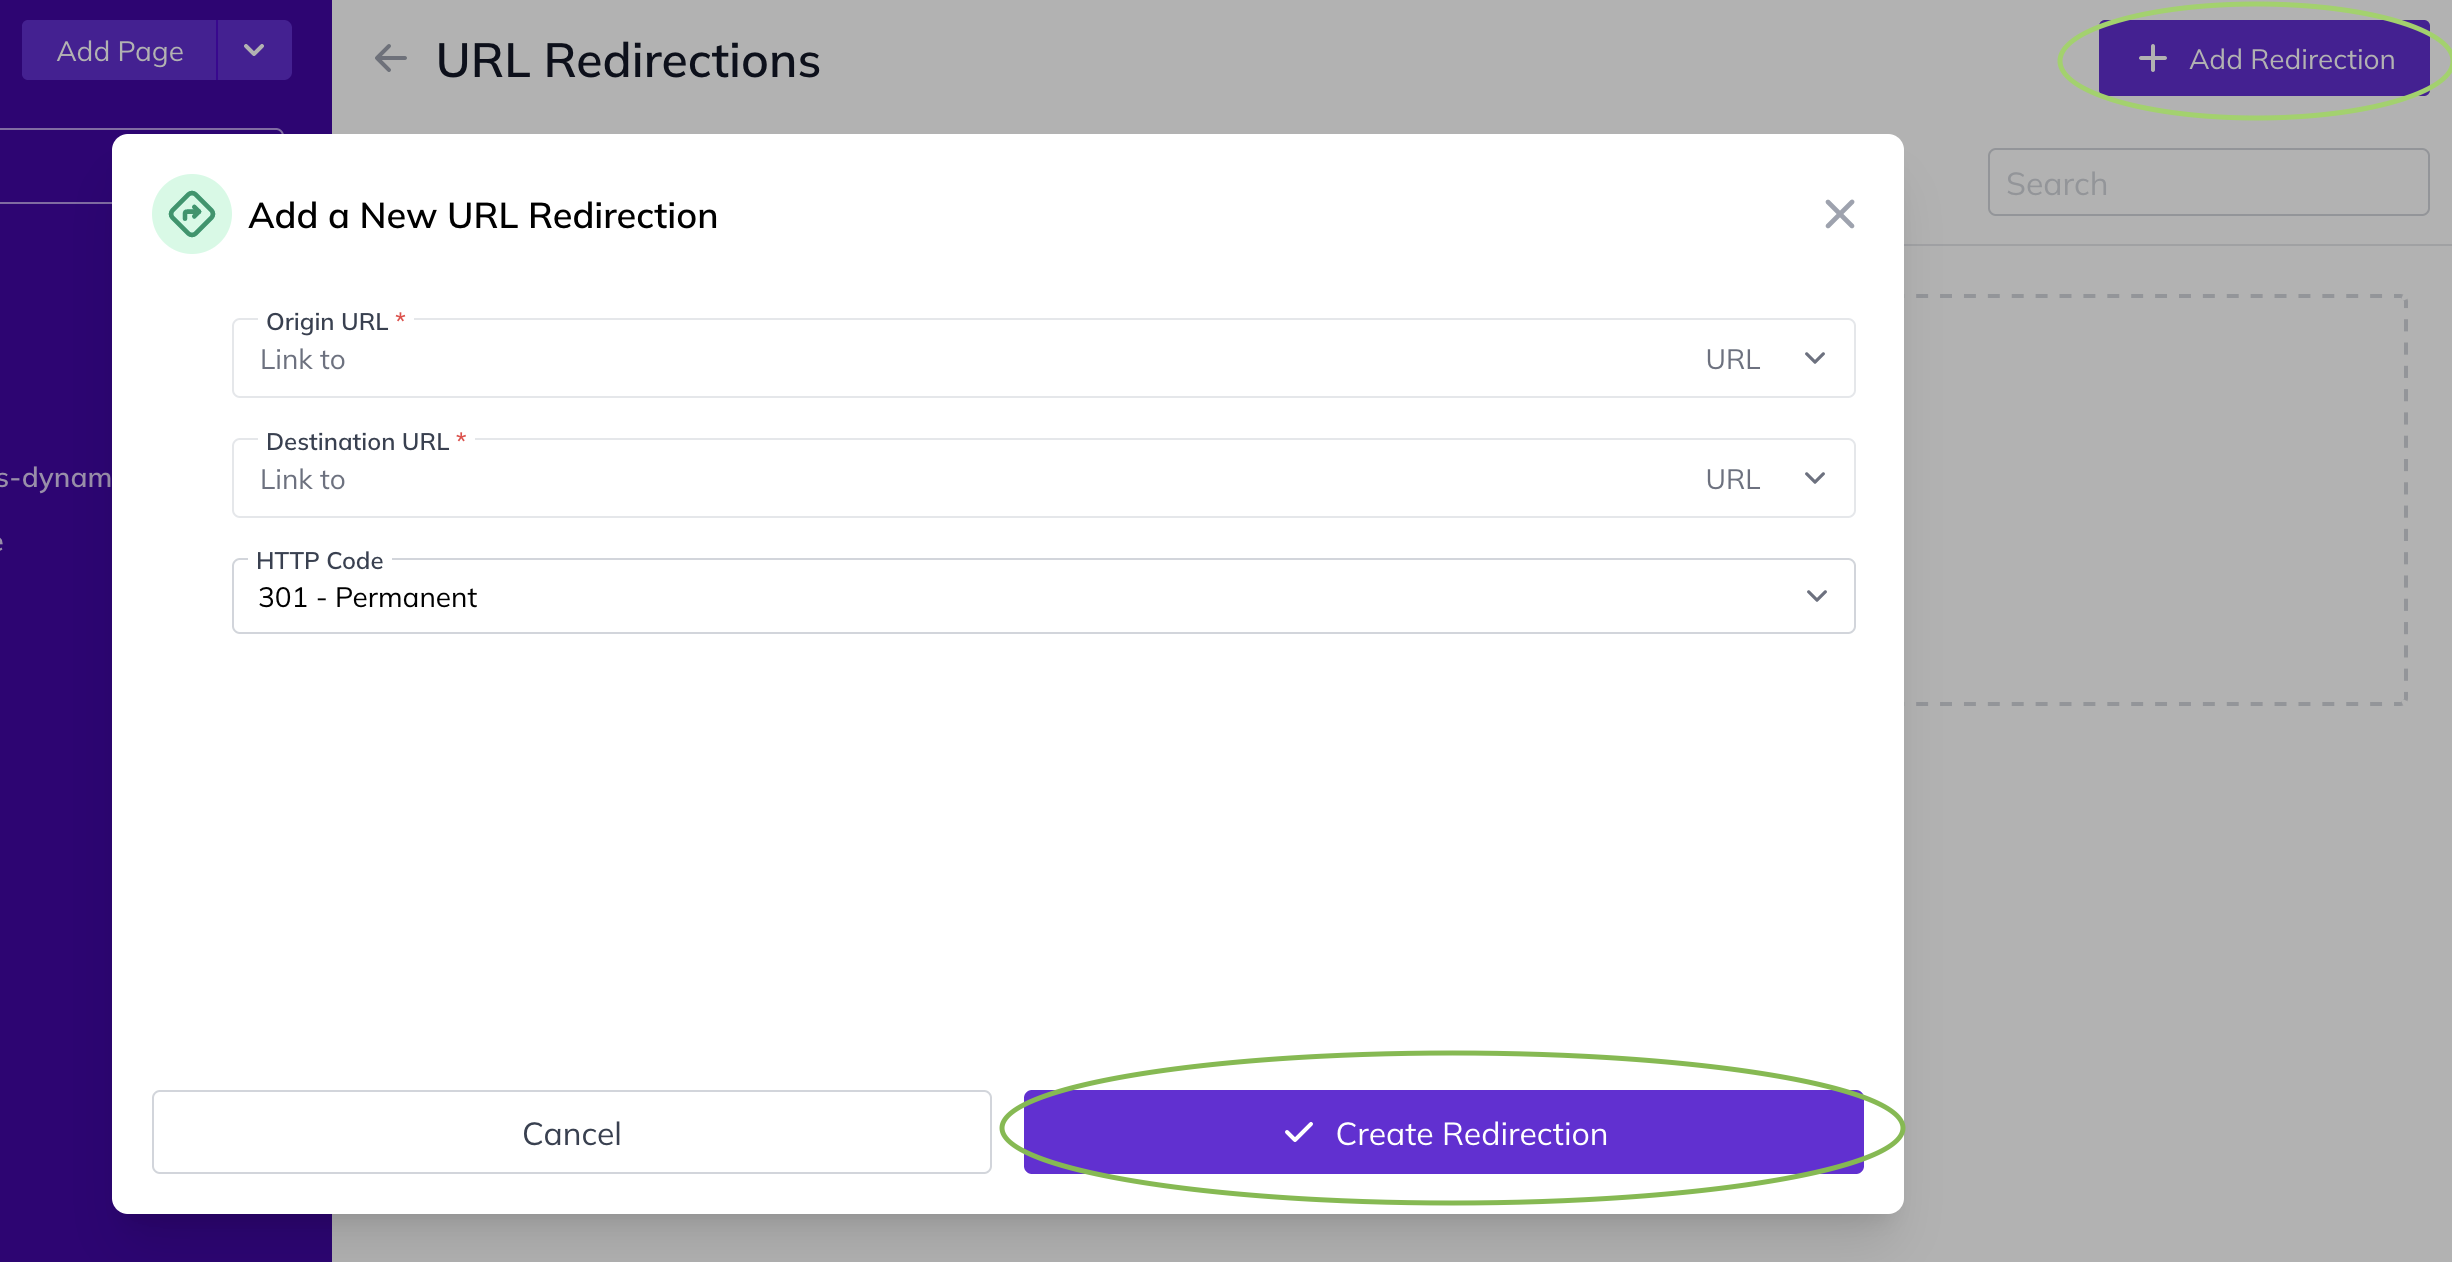 Screenshot showing an example pop-up window where you can enter your Origin URL, Destination URL and HTTP Code type for the URL Redirection you're creating.<br>